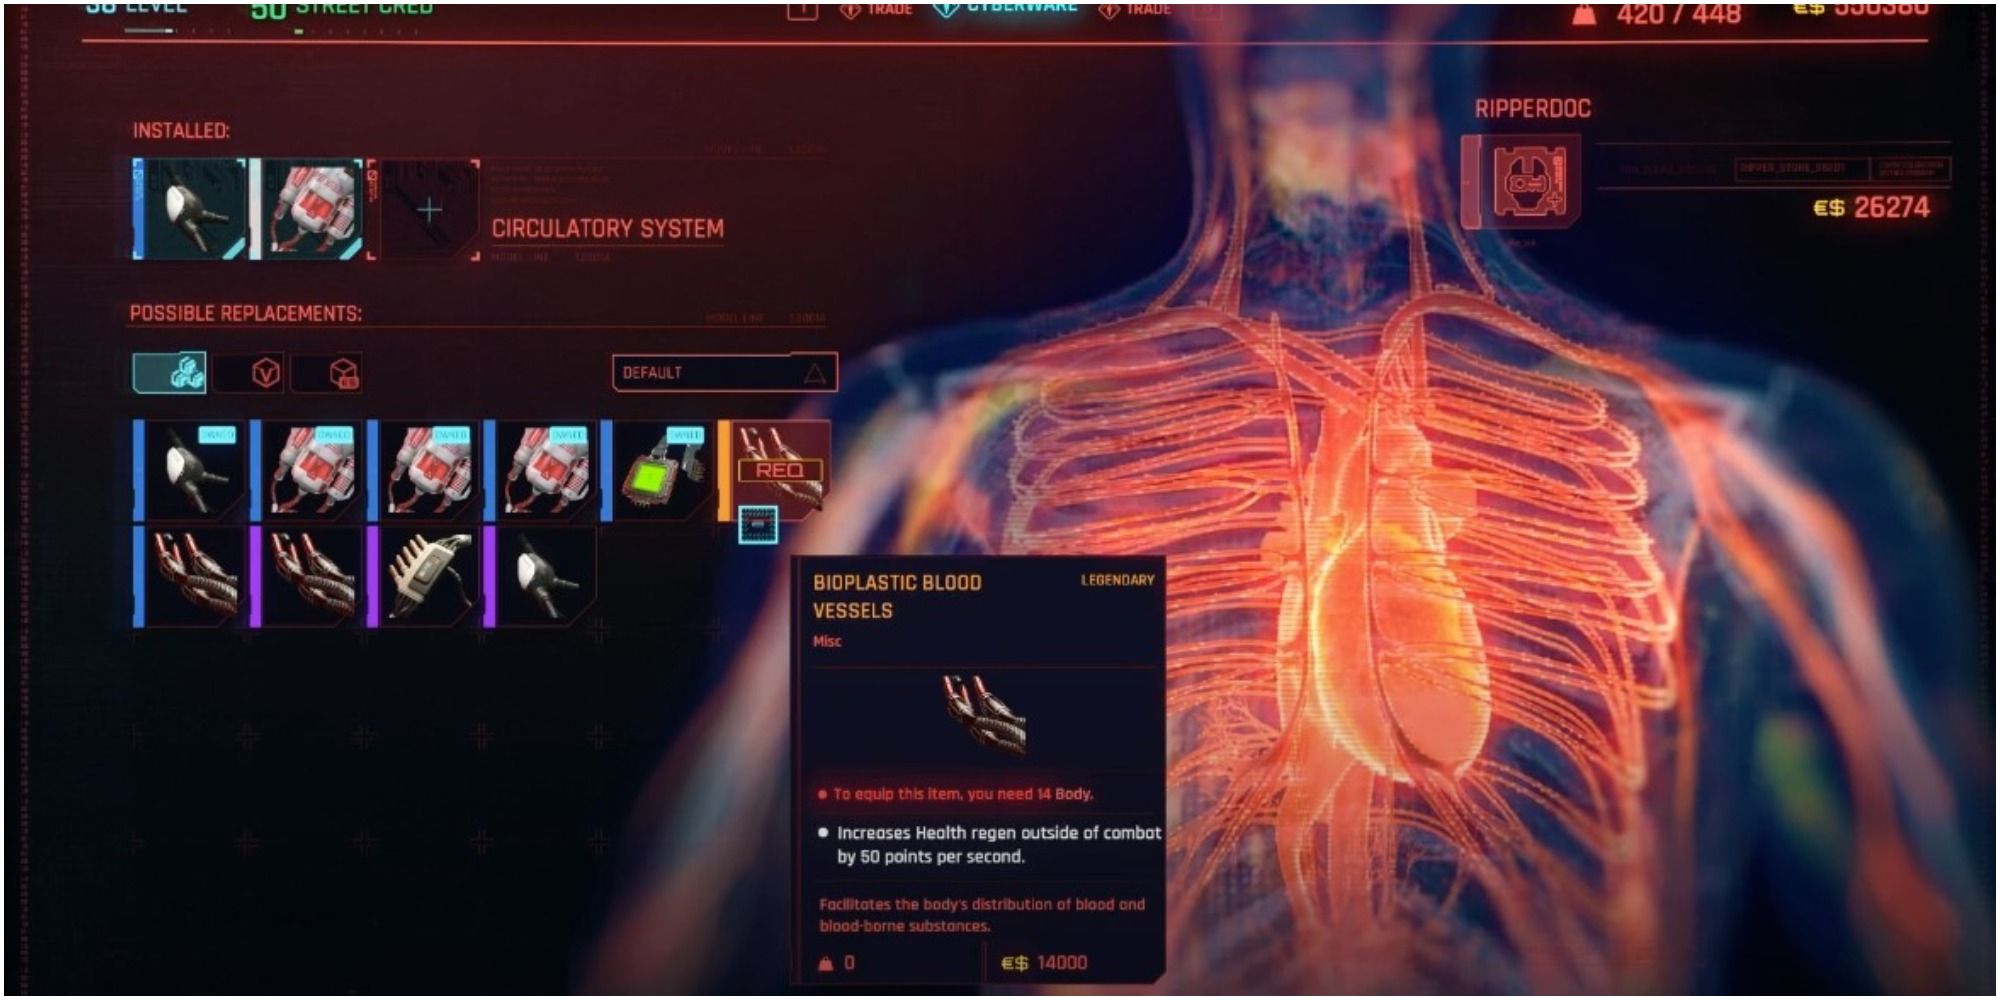 Cyberpunk 2077 Not Meeting The Requirements For The Bioplastic Blood Vessels